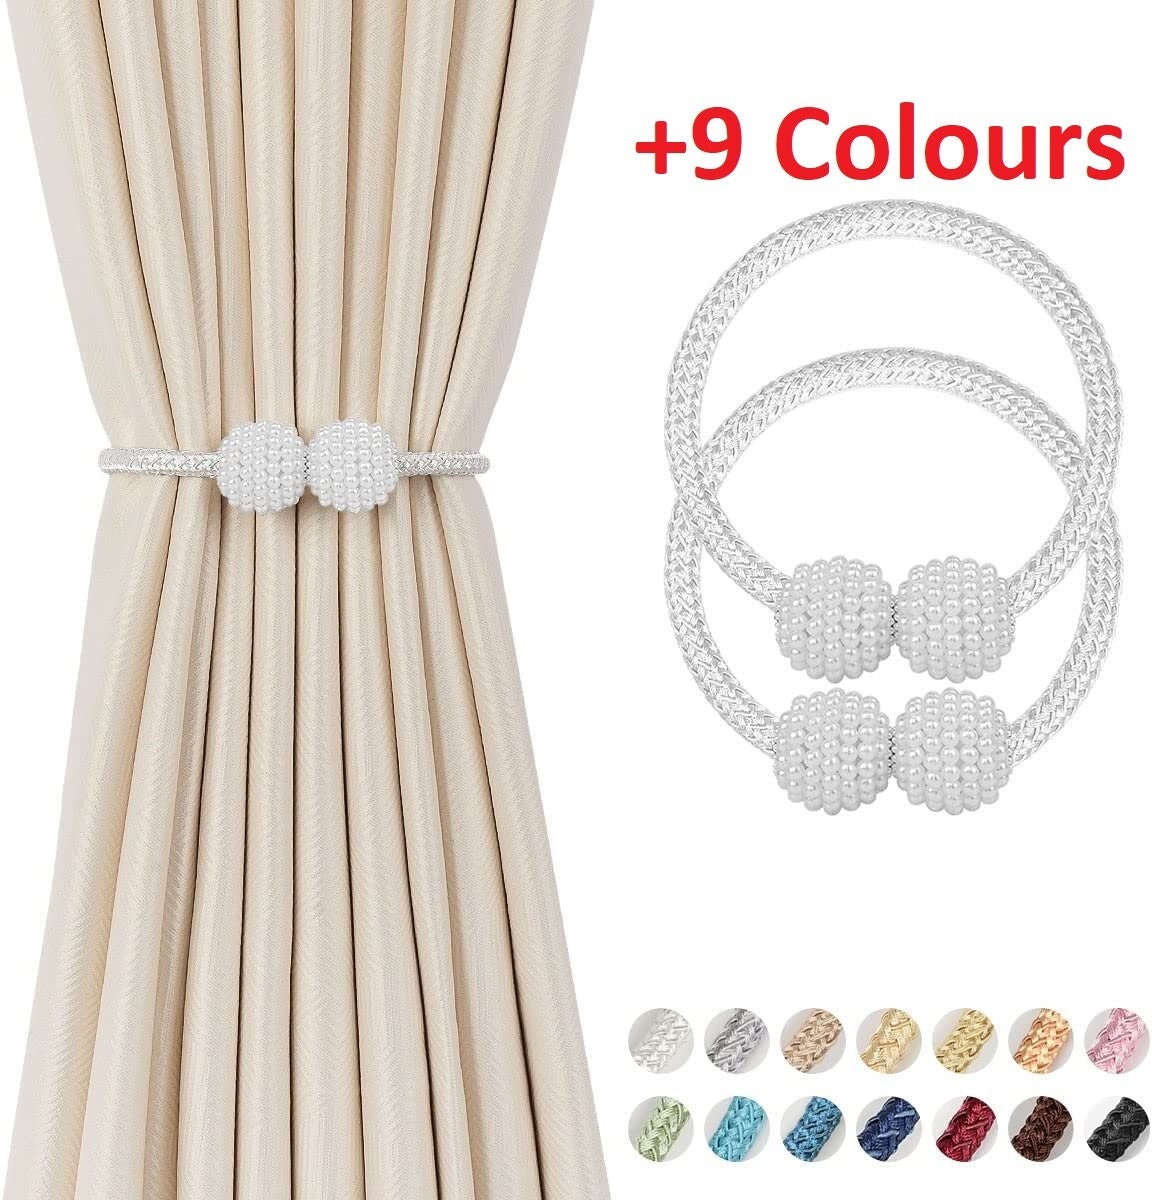 1 Pearl Magnetic Curtain Clip Curtain Holders Tieback Buckle Clips Hanging  Ball Buckle Tie Back Curtain Accessories Home Decor 